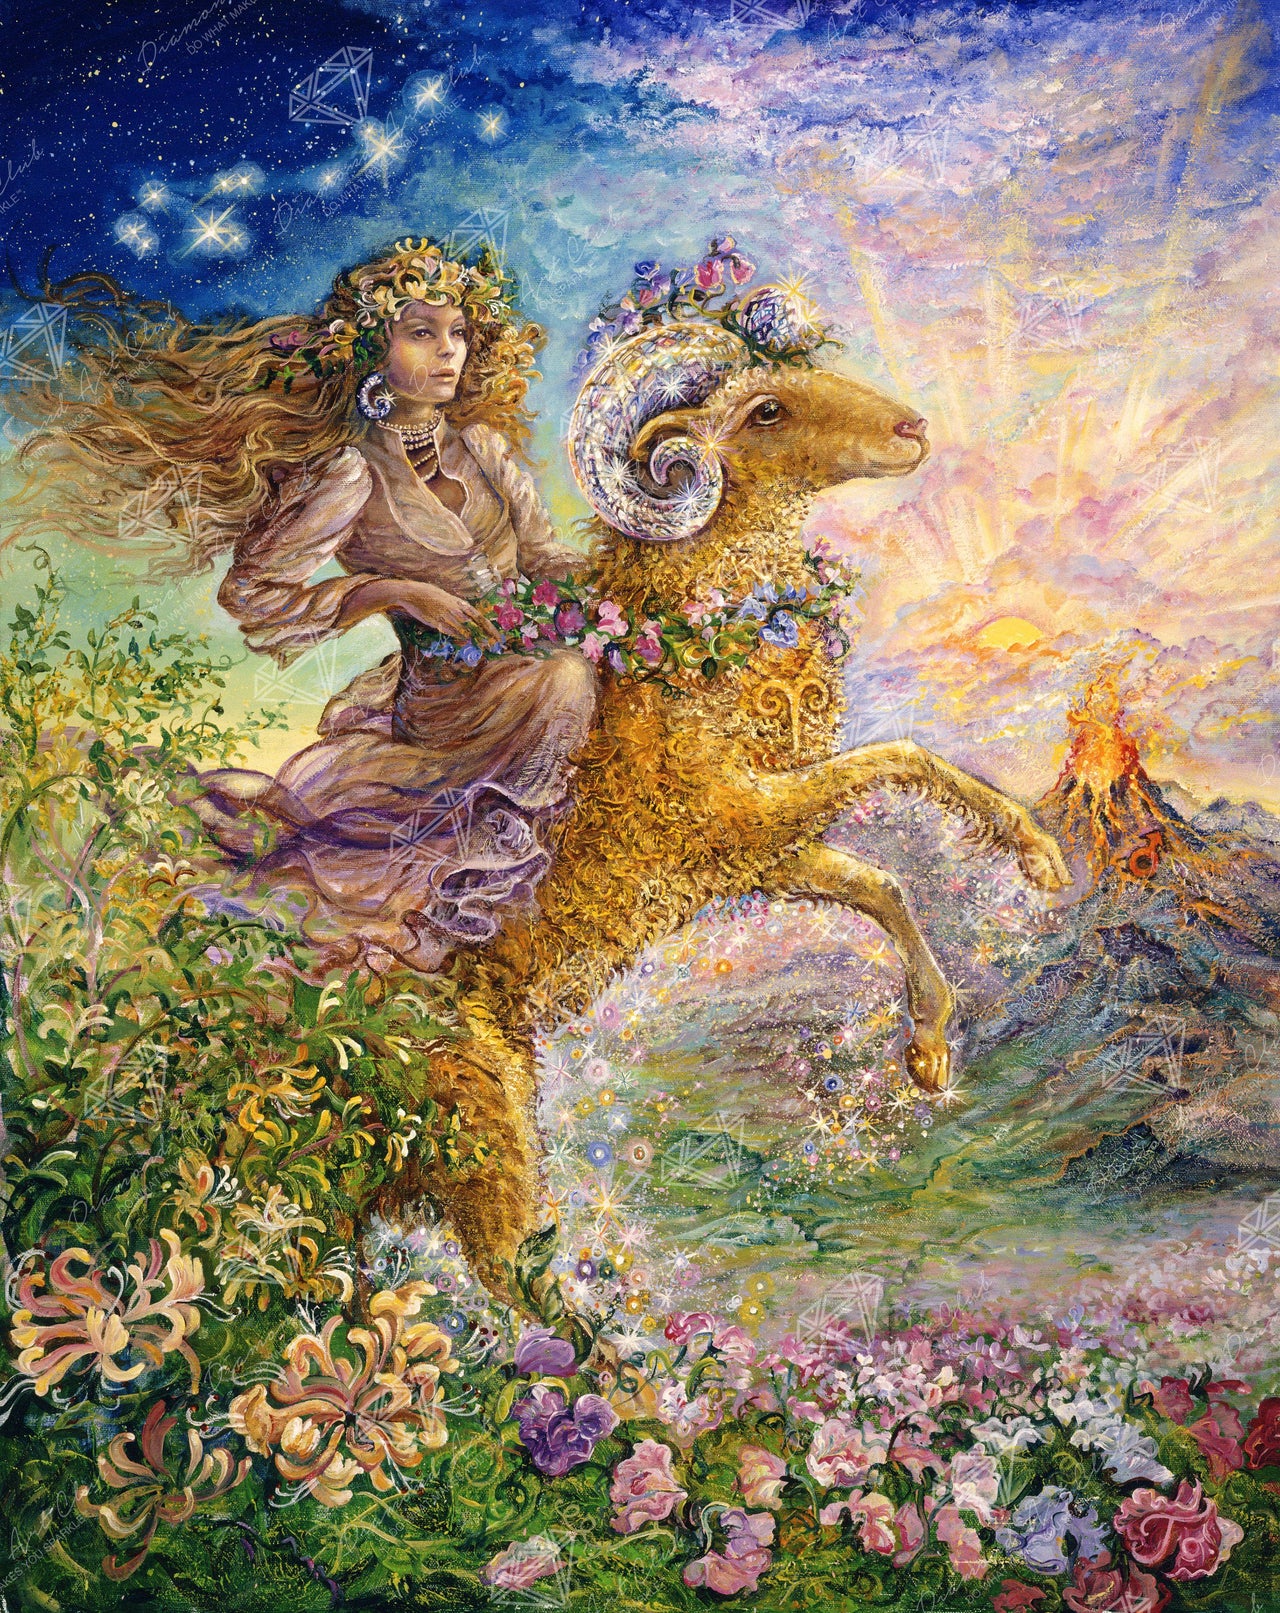 Diamond Painting Aries 27.6" x 34.7″ (70cm x 88cm) / Square with 63 Colors including 5 ABs / 96,673